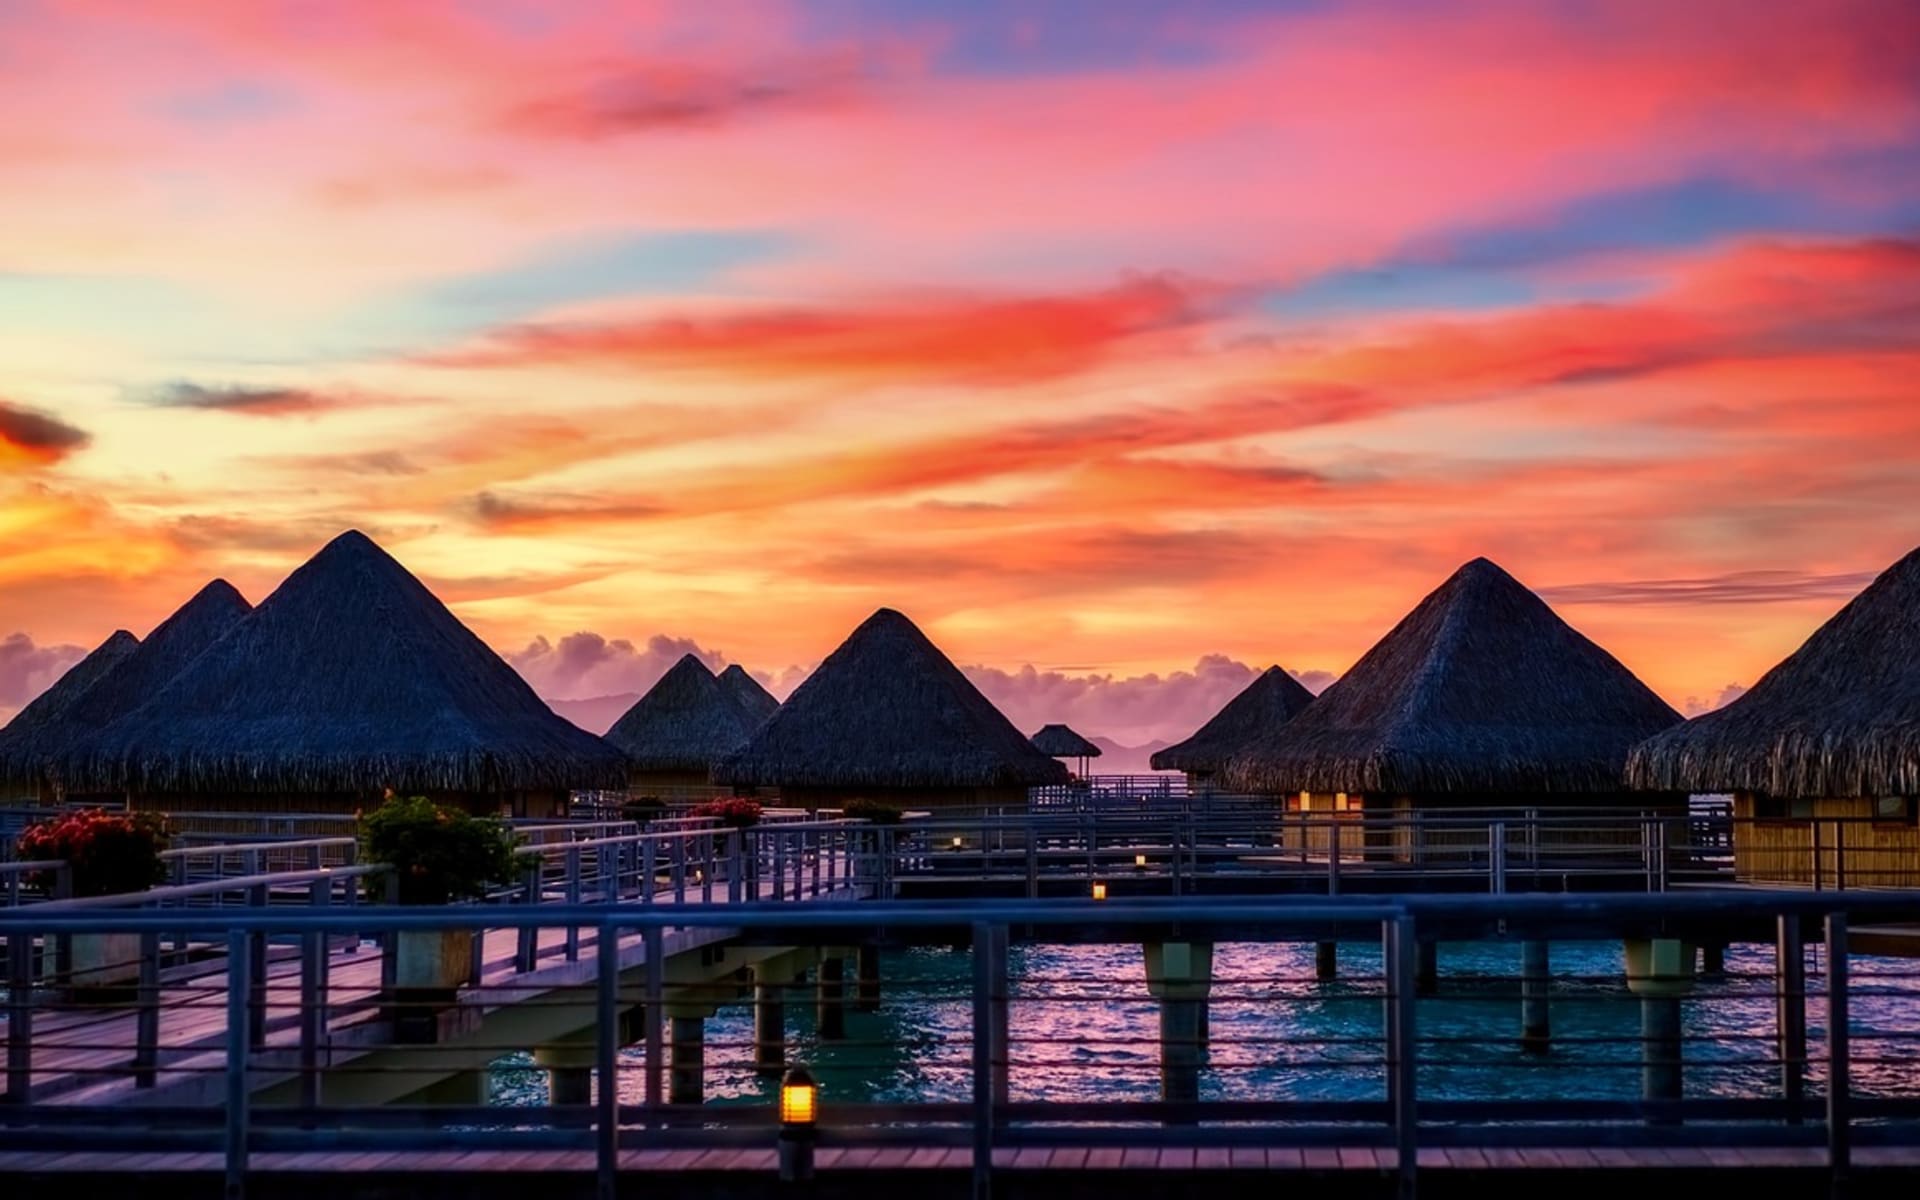 The sun has set, cascading orange and yellow hues across the sky, and the overwater villas are purple. 